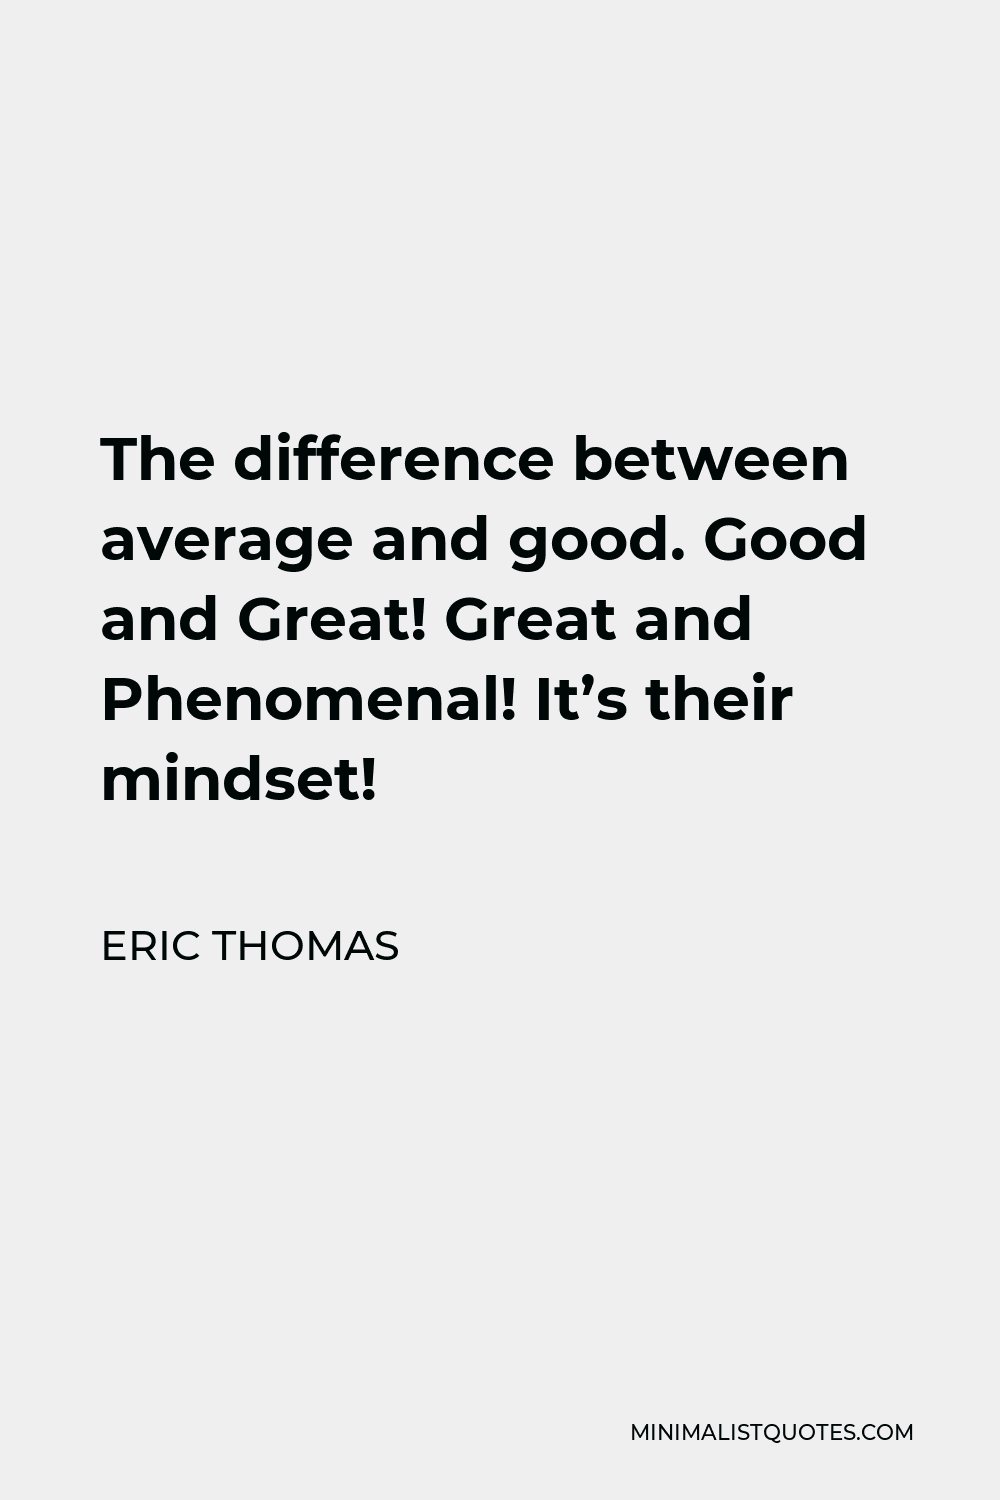 Eric Thomas Quote - The difference between average and good. Good and Great! Great and Phenomenal! It’s their mindset!